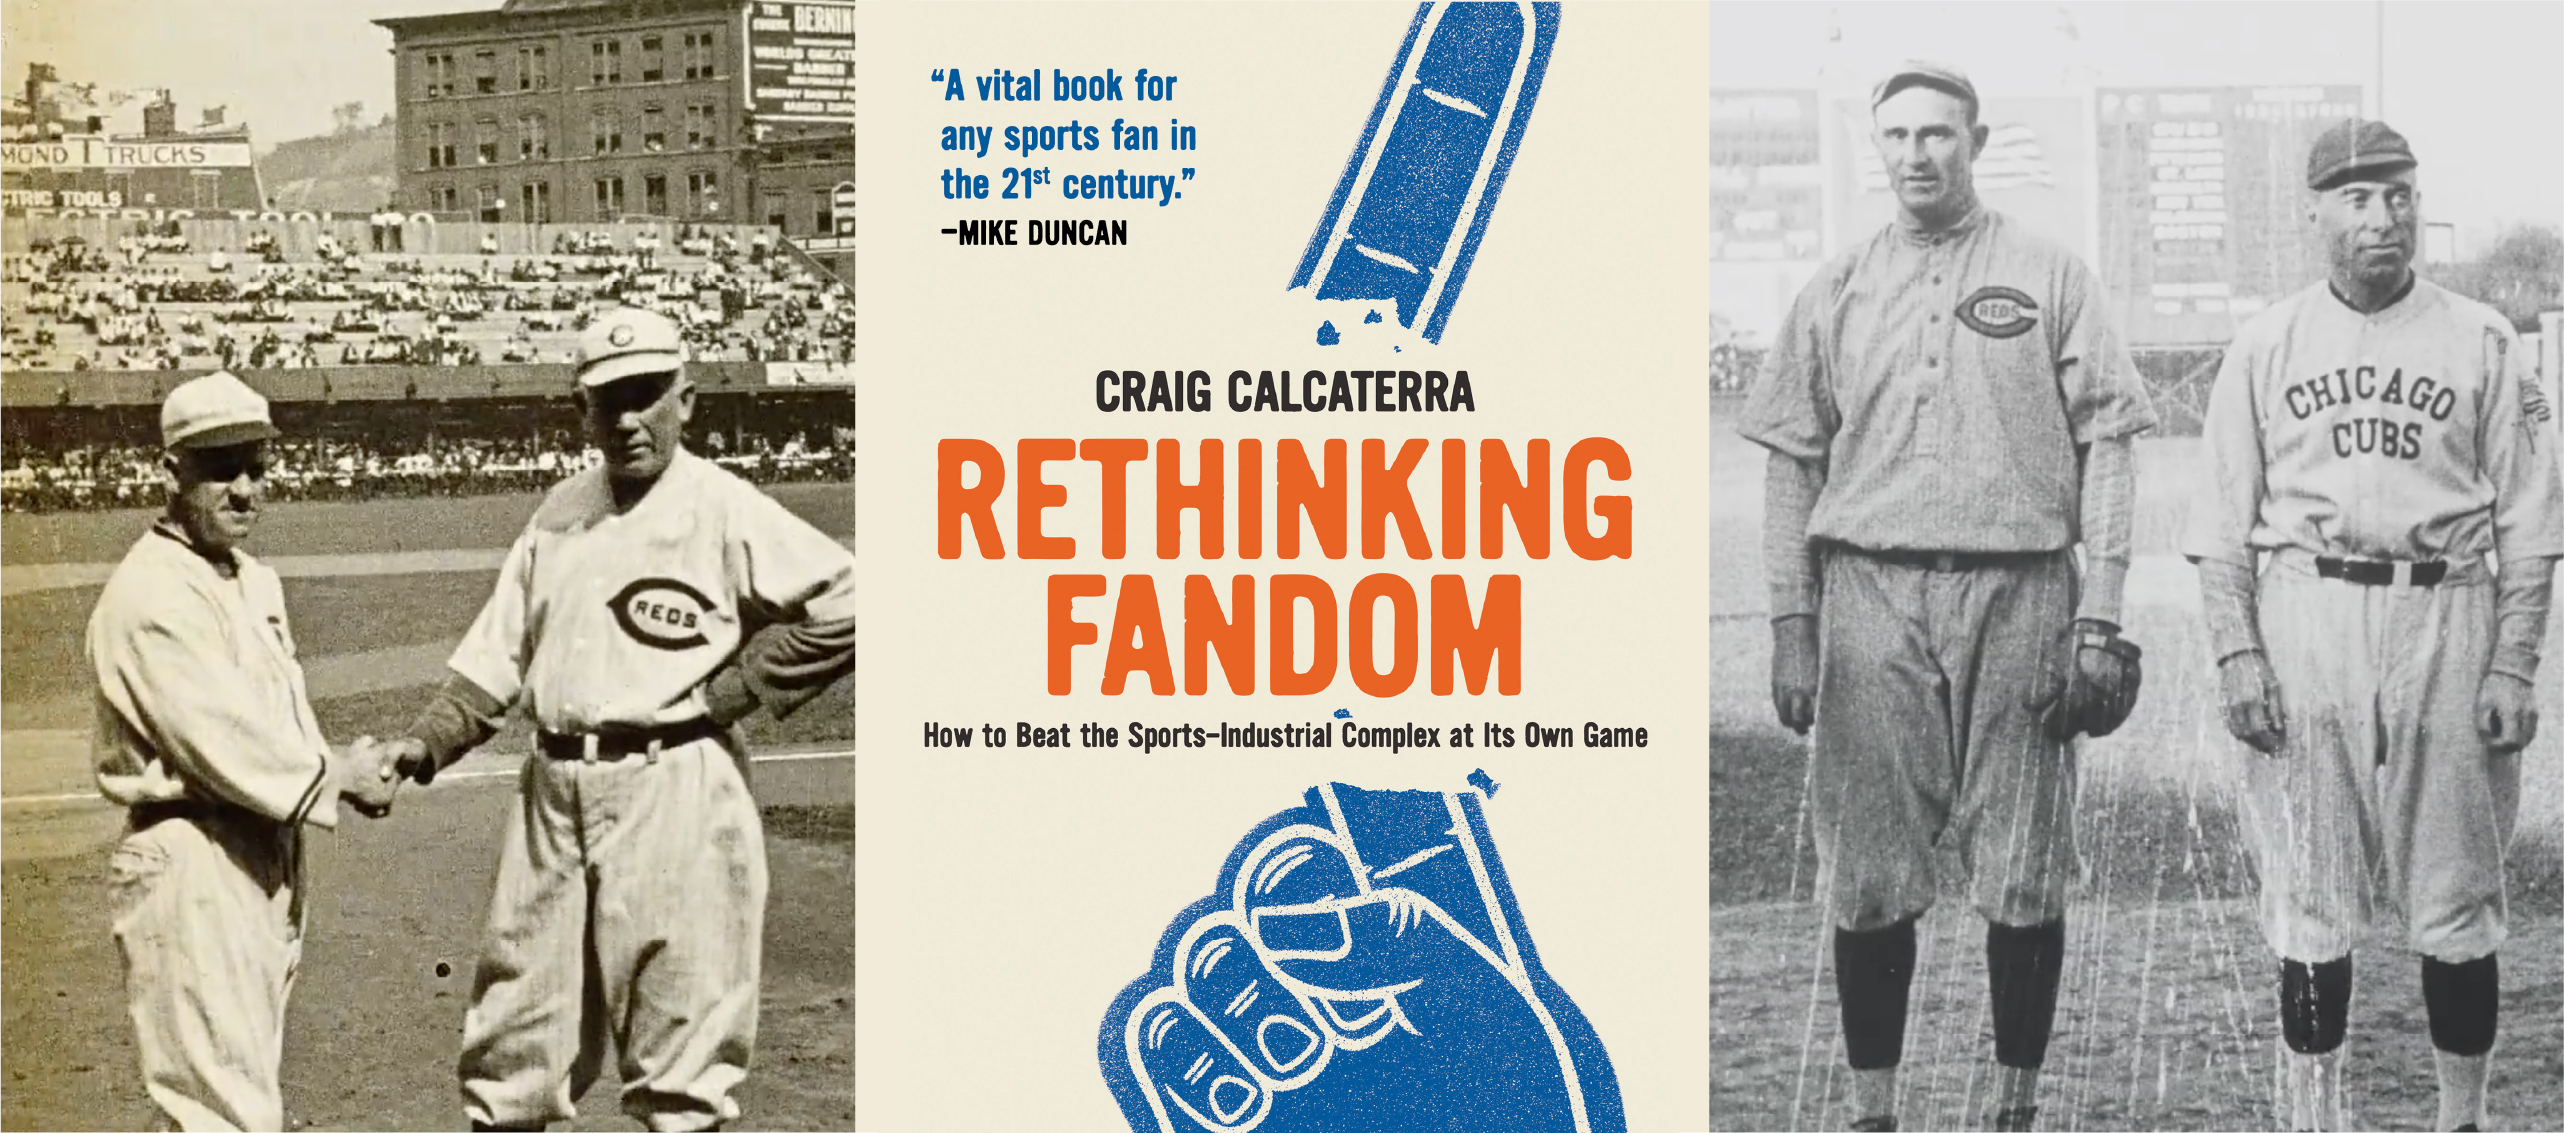 On the left is a black-and-white photograph of Chicago White Sox manager Kid Gleason (left) shaking hands with Cincinnati Reds manager Pat Moran (right) on the field before the start of the 1919 World Series. In the center is the book cover of Craig Calcaterra's Rethinking Fandom; the title is in orange font in between a broken blue foam finger. On the right is a black-and-white photograph of Reds pitcher Fred Toney (left) and Chicago Cubs manager Fred Mitchell (right) on the field of their 1917 game.